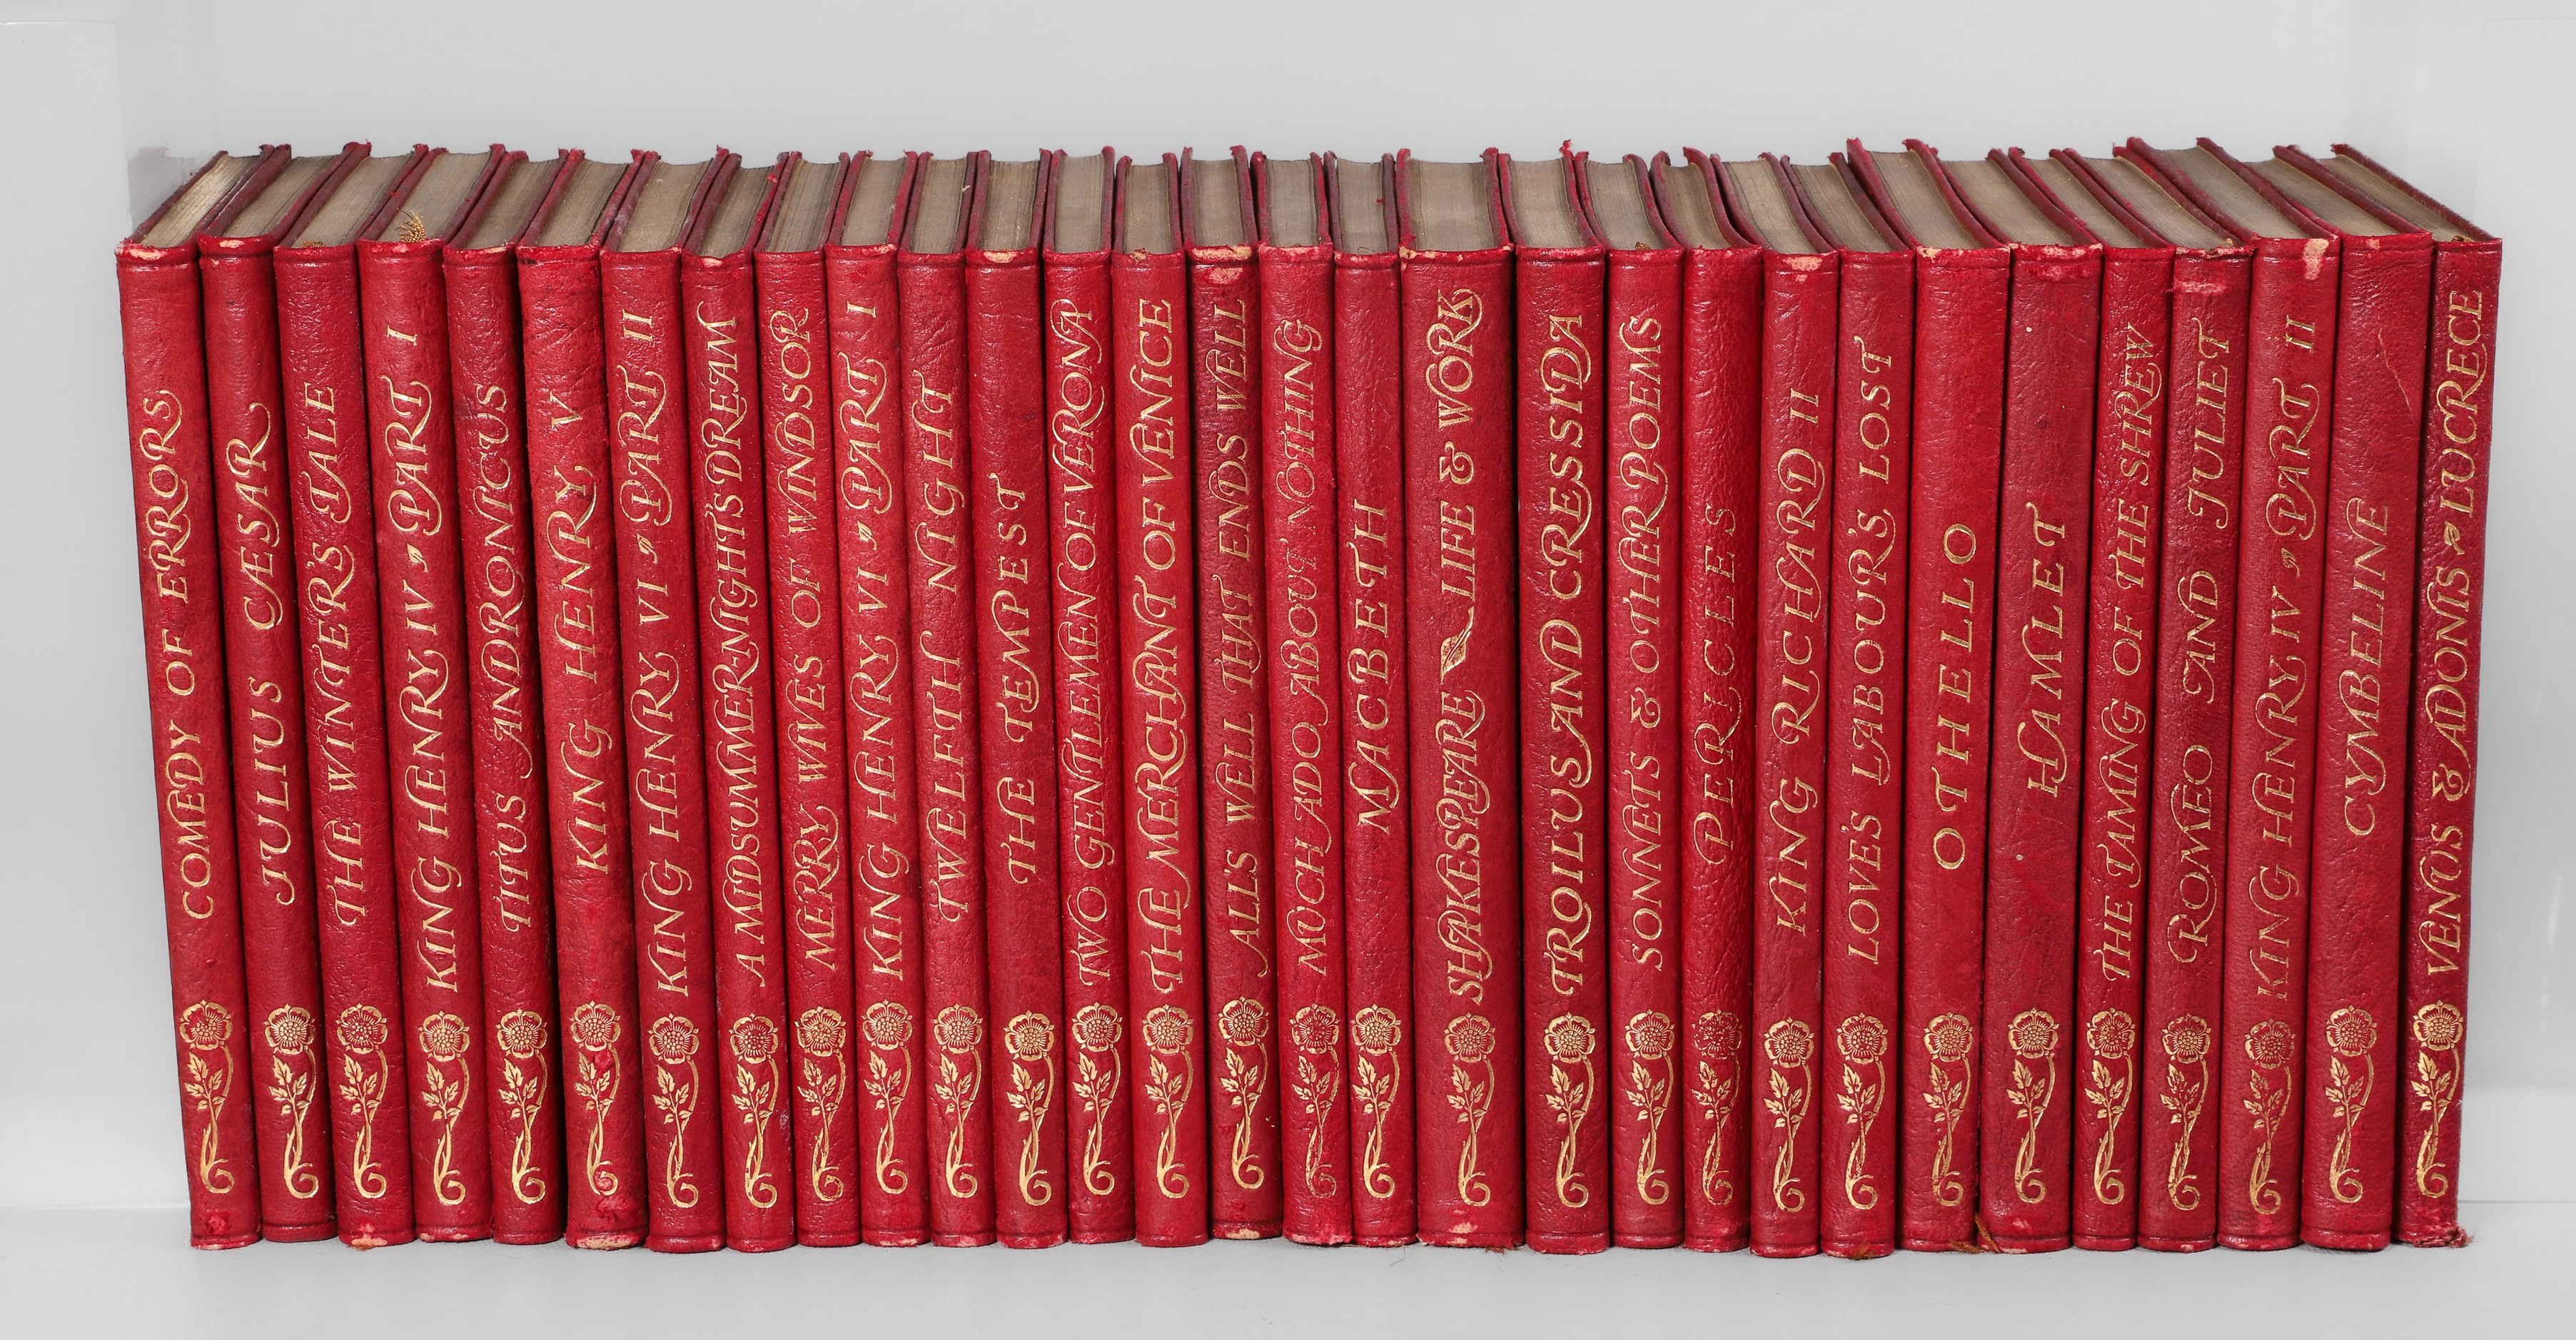 A thirty-volume set of the Works of